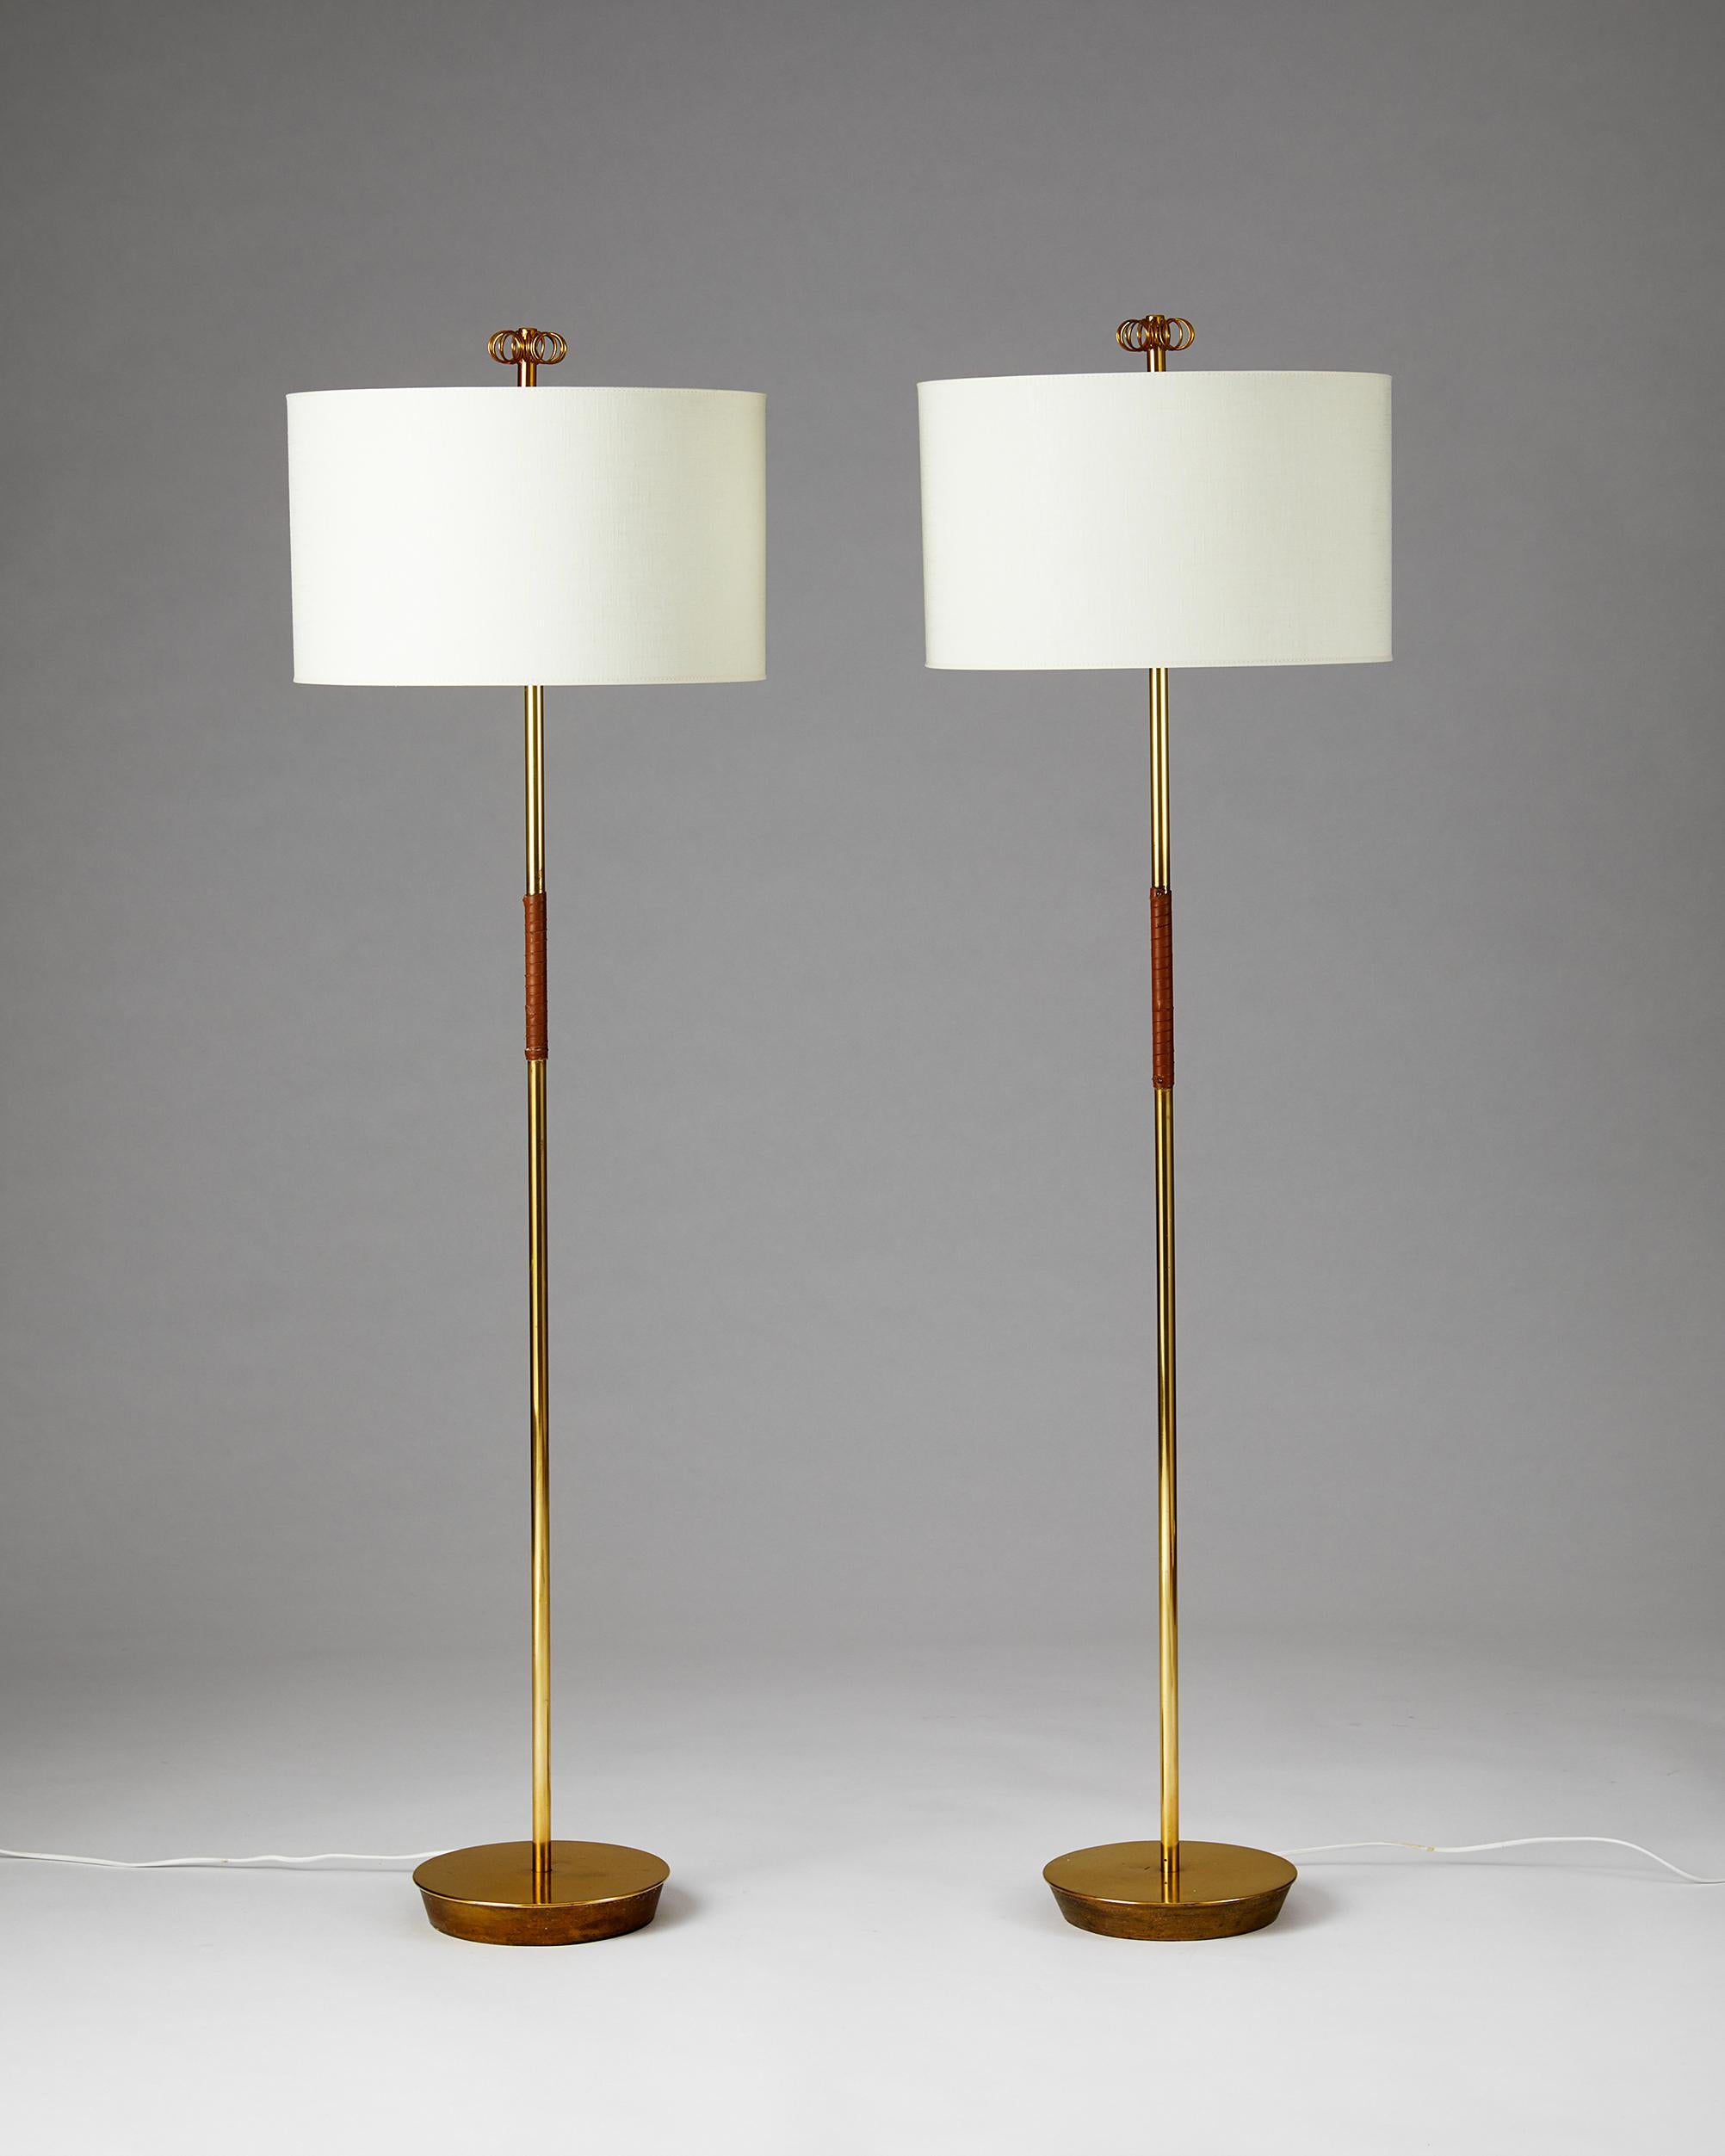 Brass, leather details and fabric shade.

Measures: H 154 cm/ 5' 1